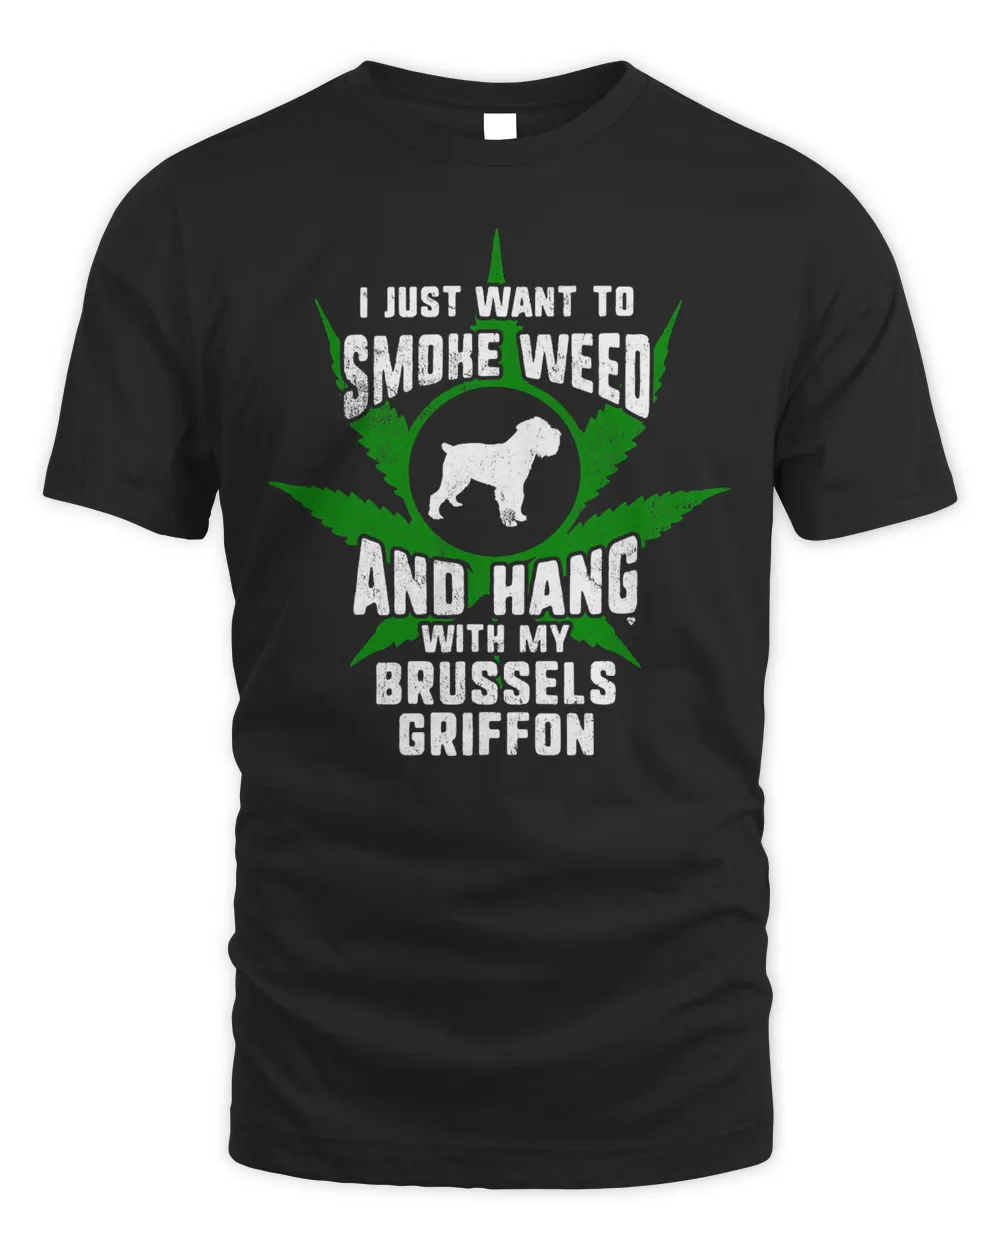 Weed And Hang With My Brussels Griffon Funny T-Shirt